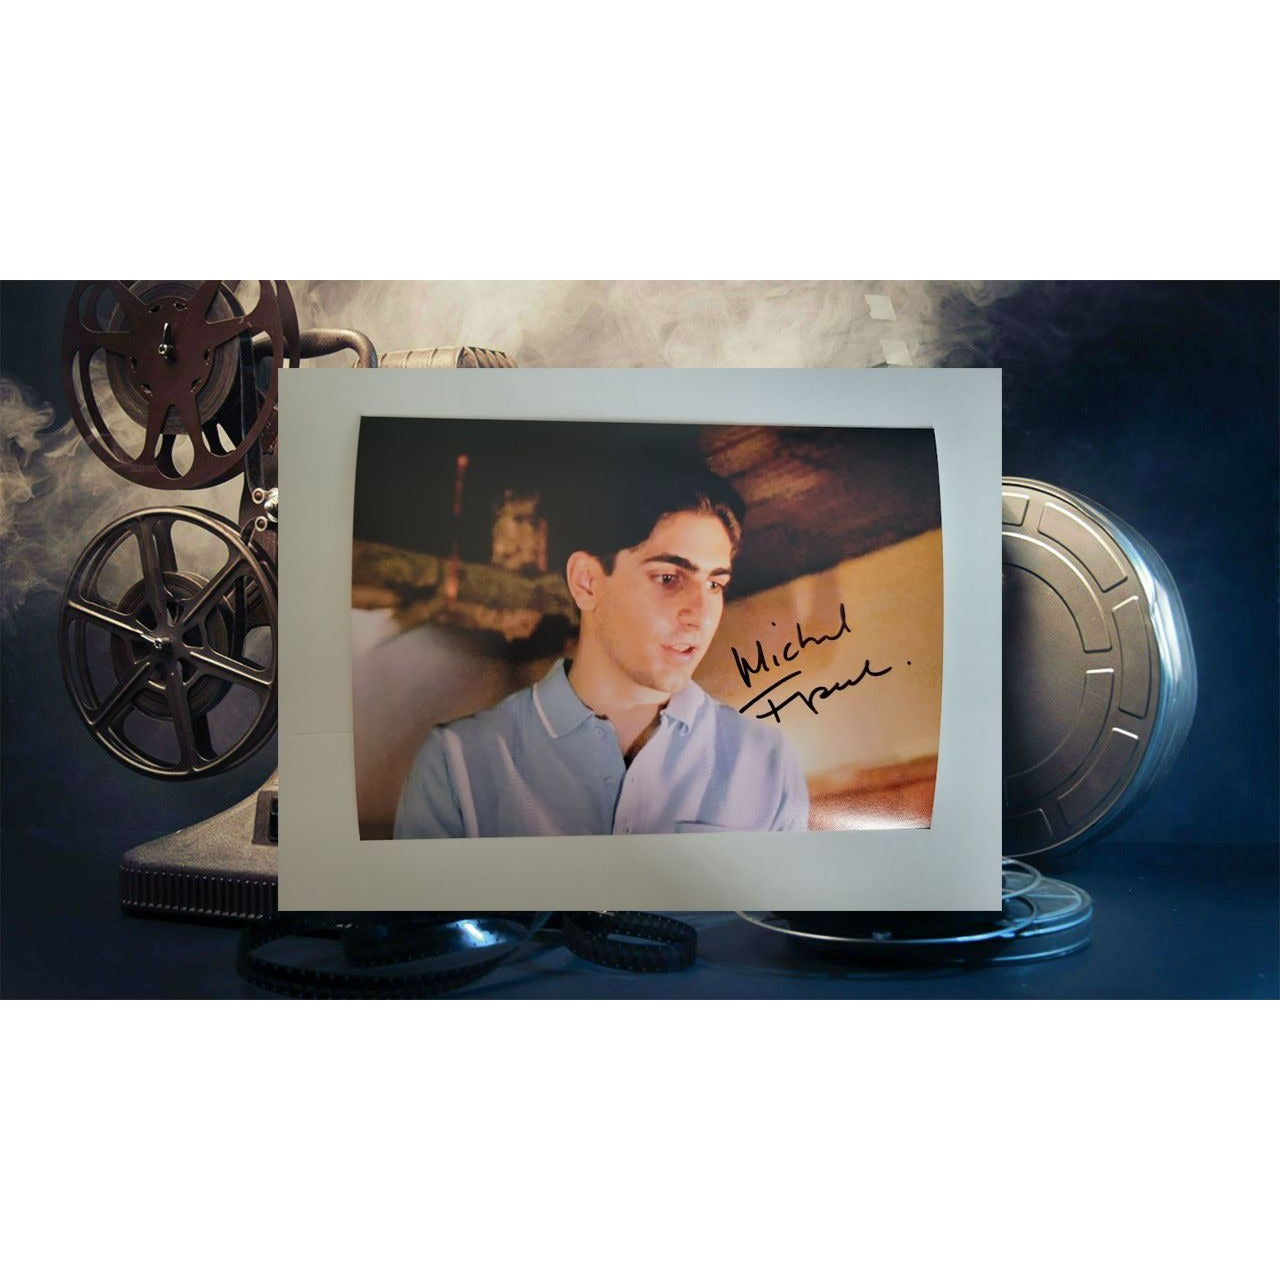 Michael Imperioli 5 x 7 photograph signed